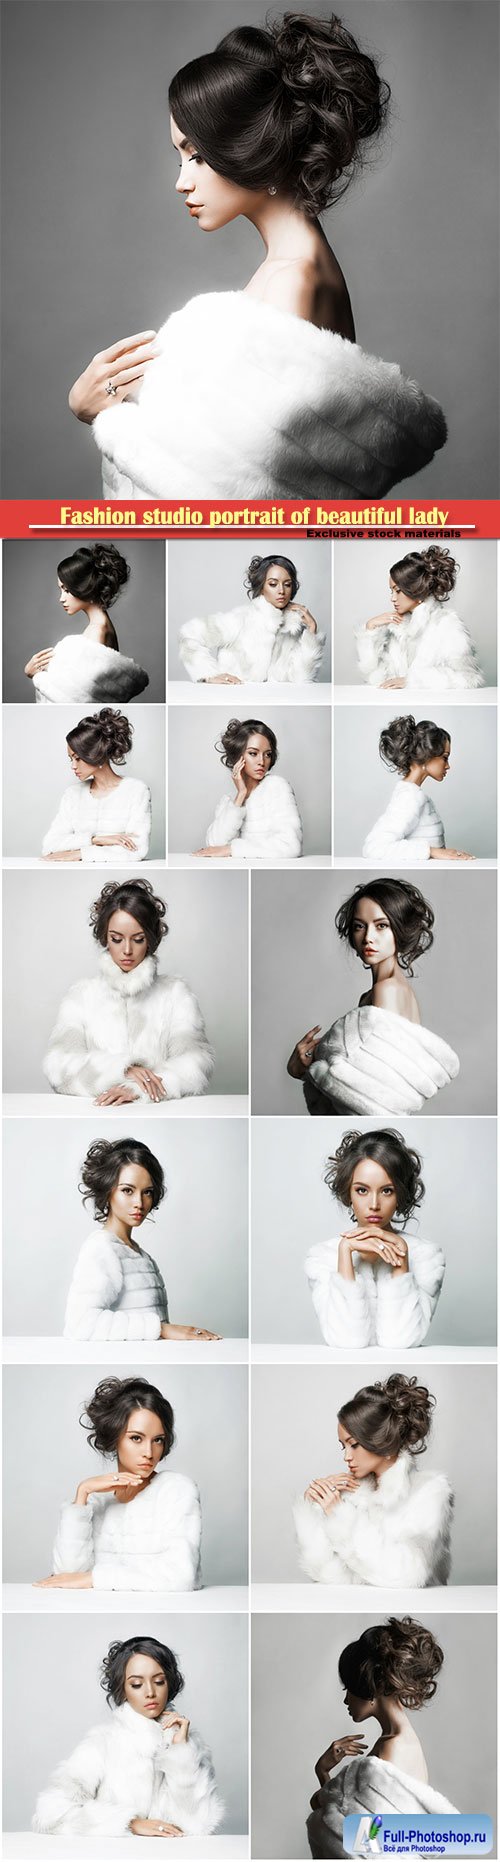 Fashion studio portrait of beautiful lady with elegant hairstyle in white fur coat